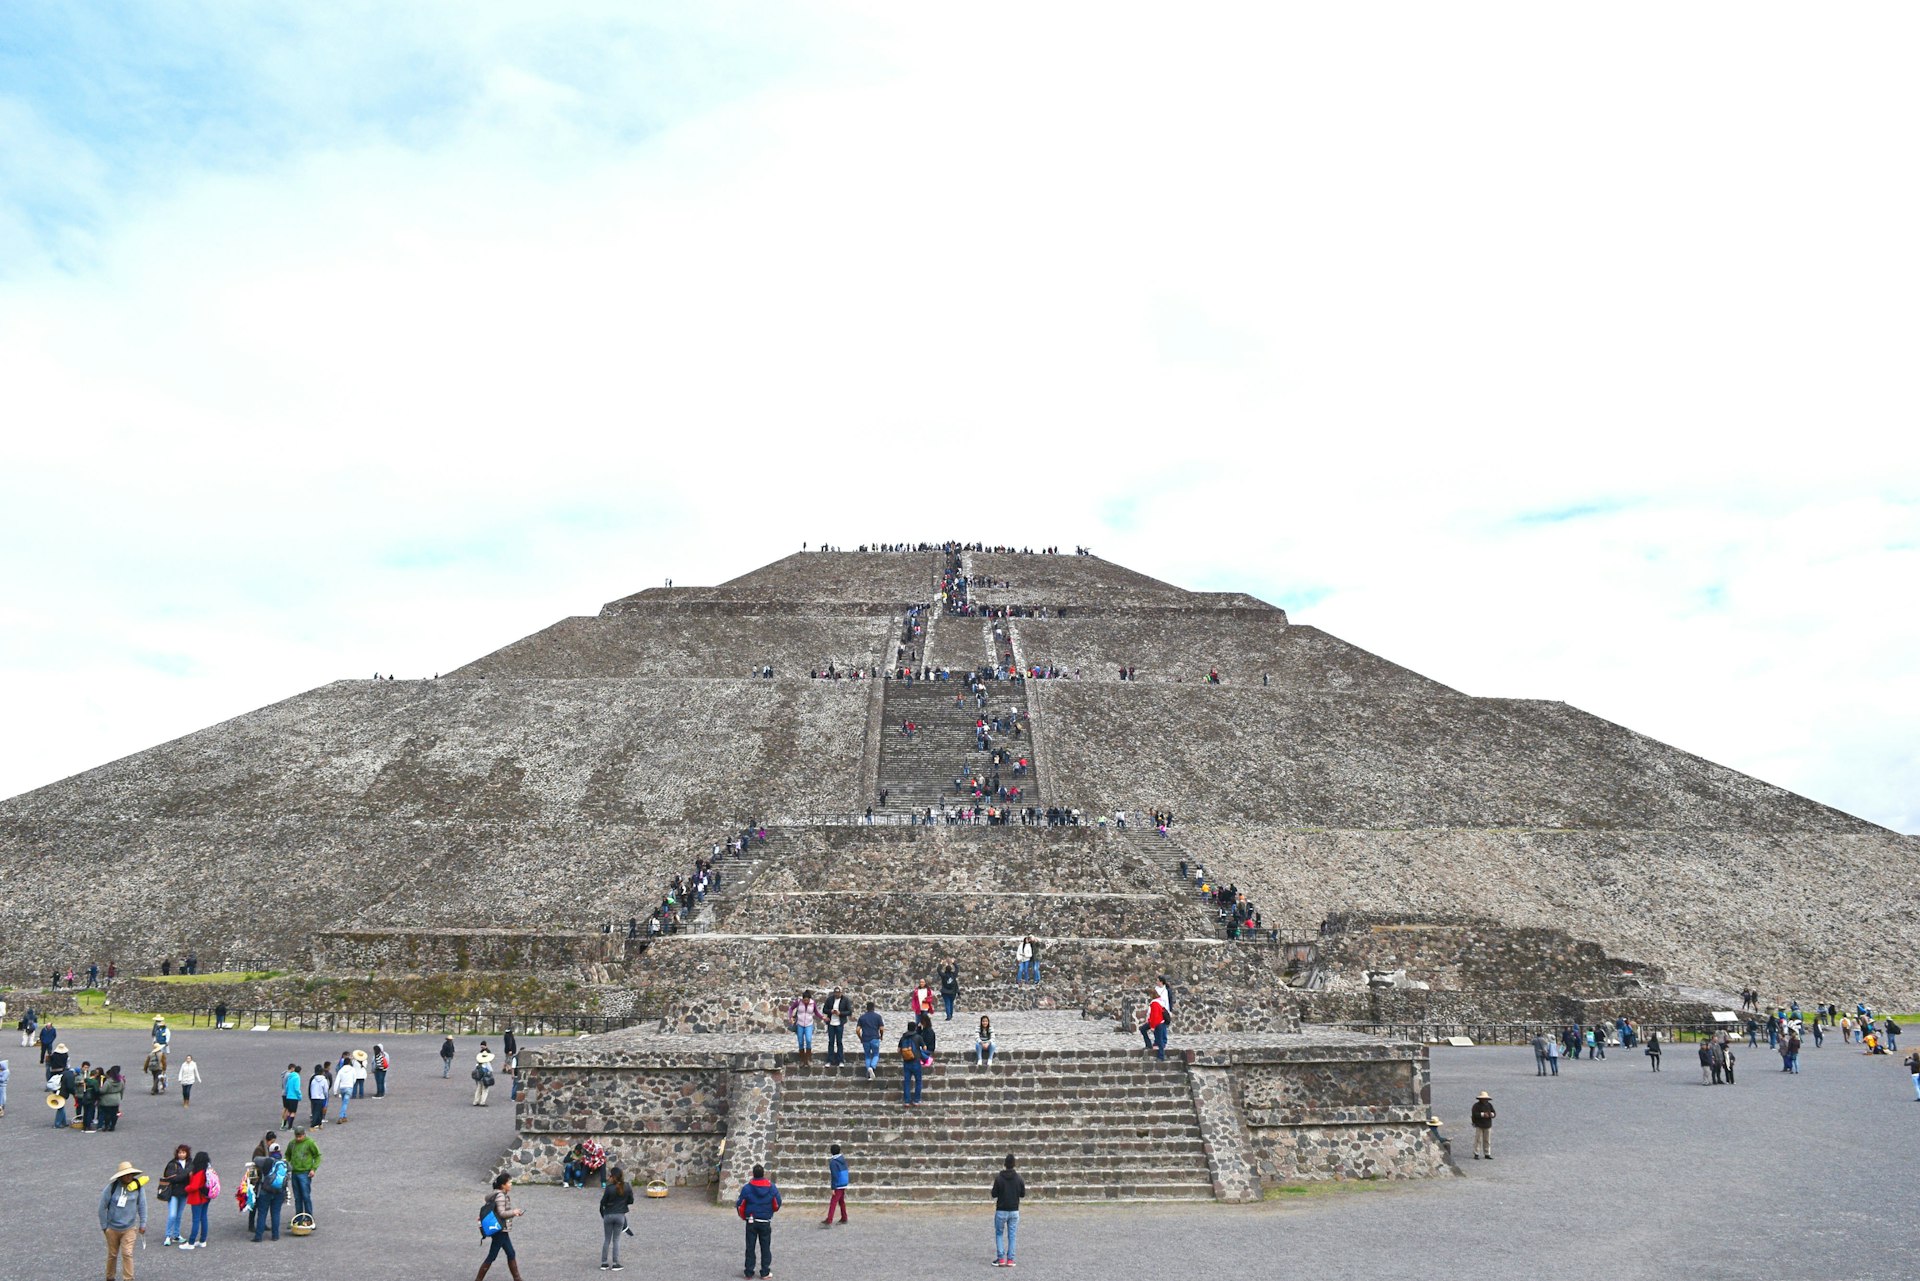 The Temple of the Sun in Teotihuacan outside Mexico City